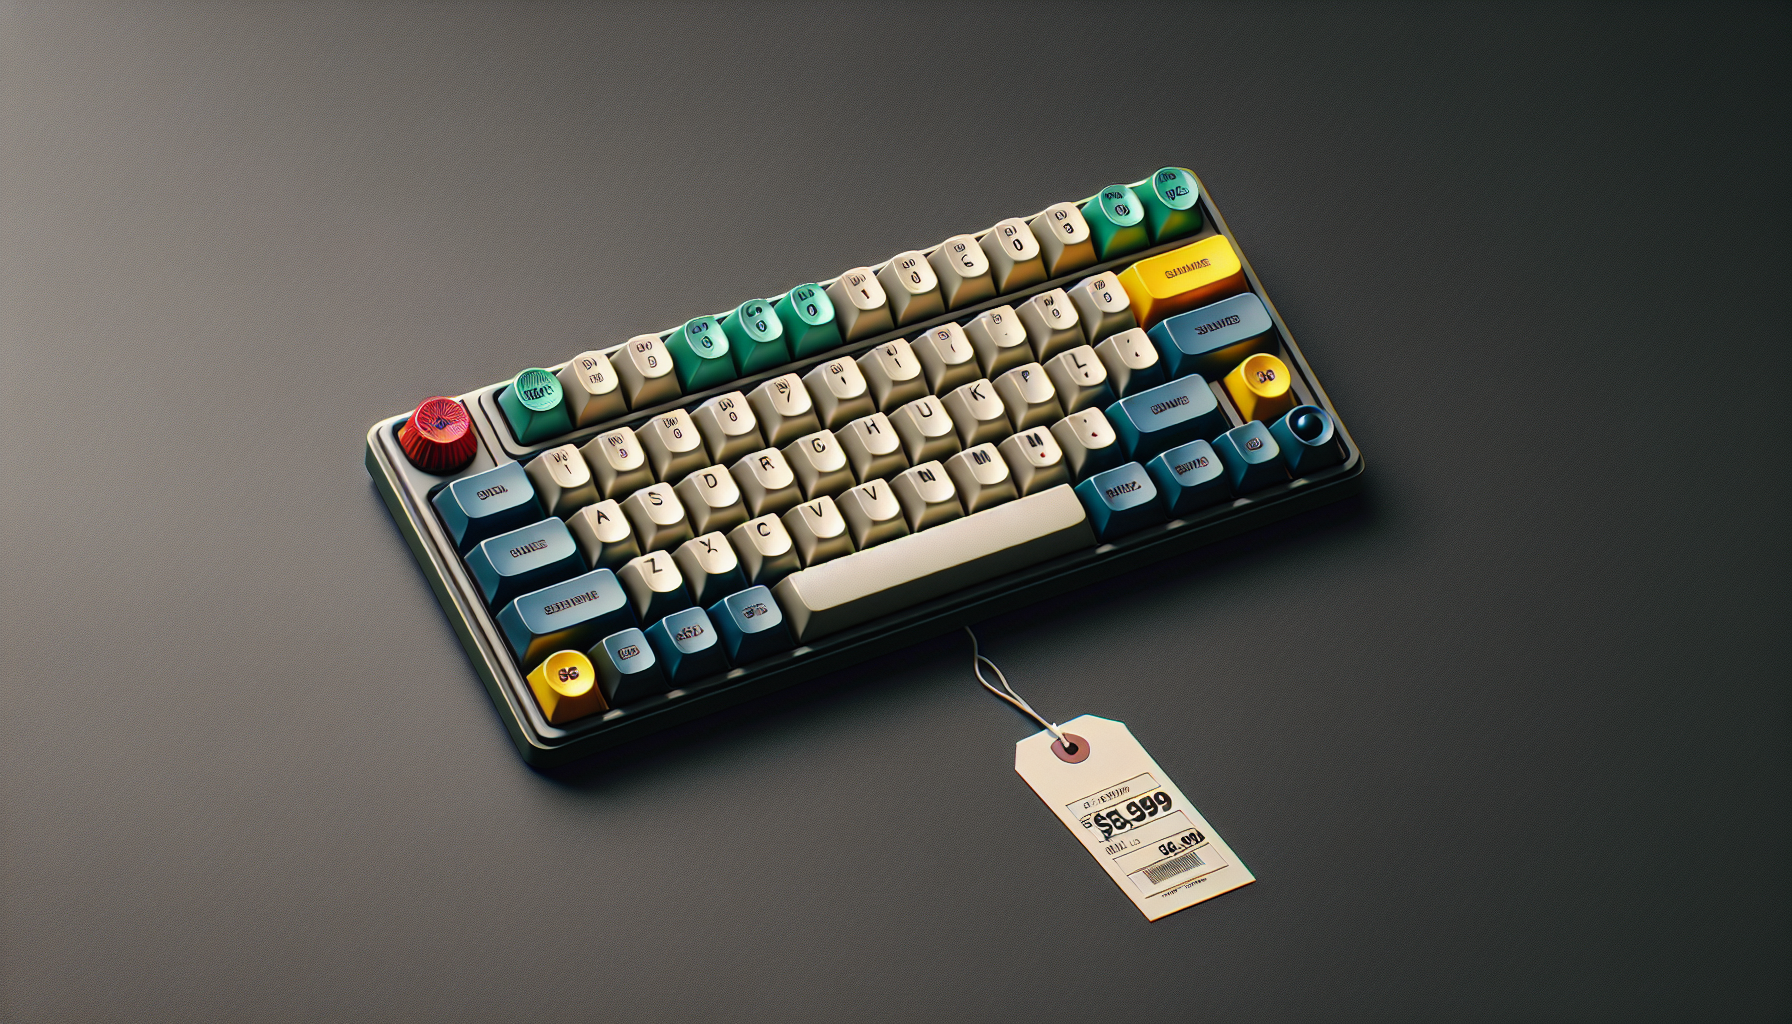 The Retro Mechanical Keyboard, inspired by Nintendo and created by 8BitDo, is now being offered at a discounted price.